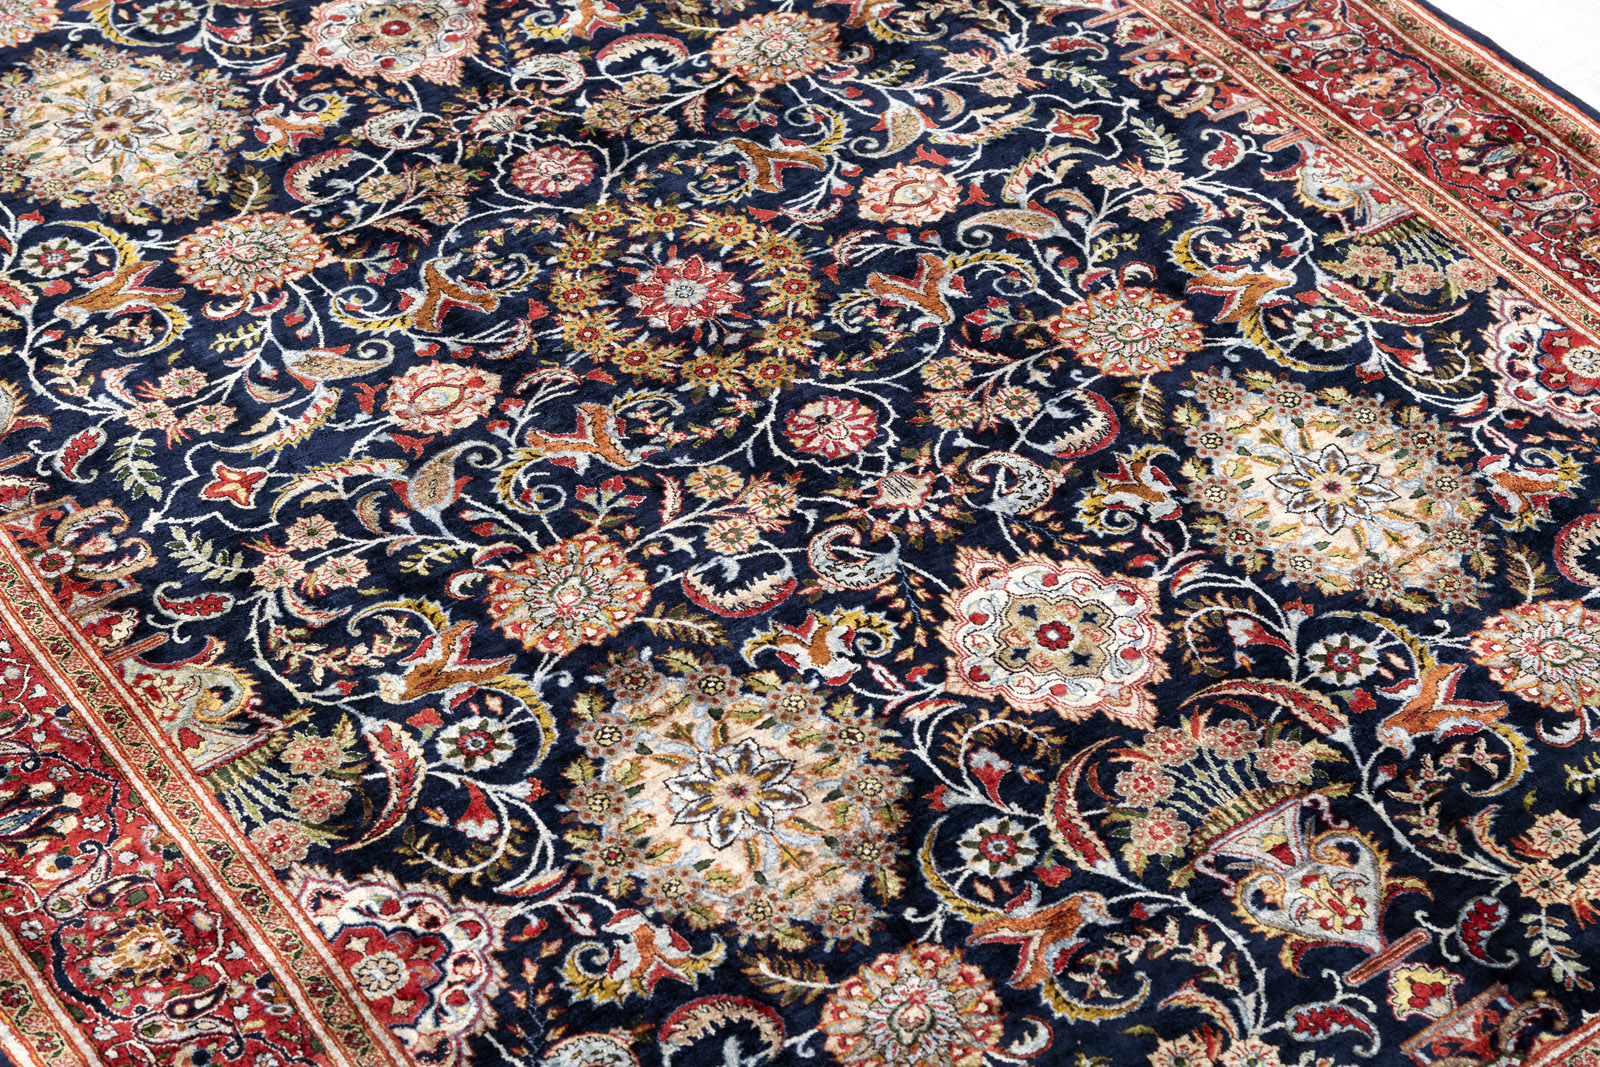 AN ALL OVER PATTERNED SILK RUG - Image 2 of 13